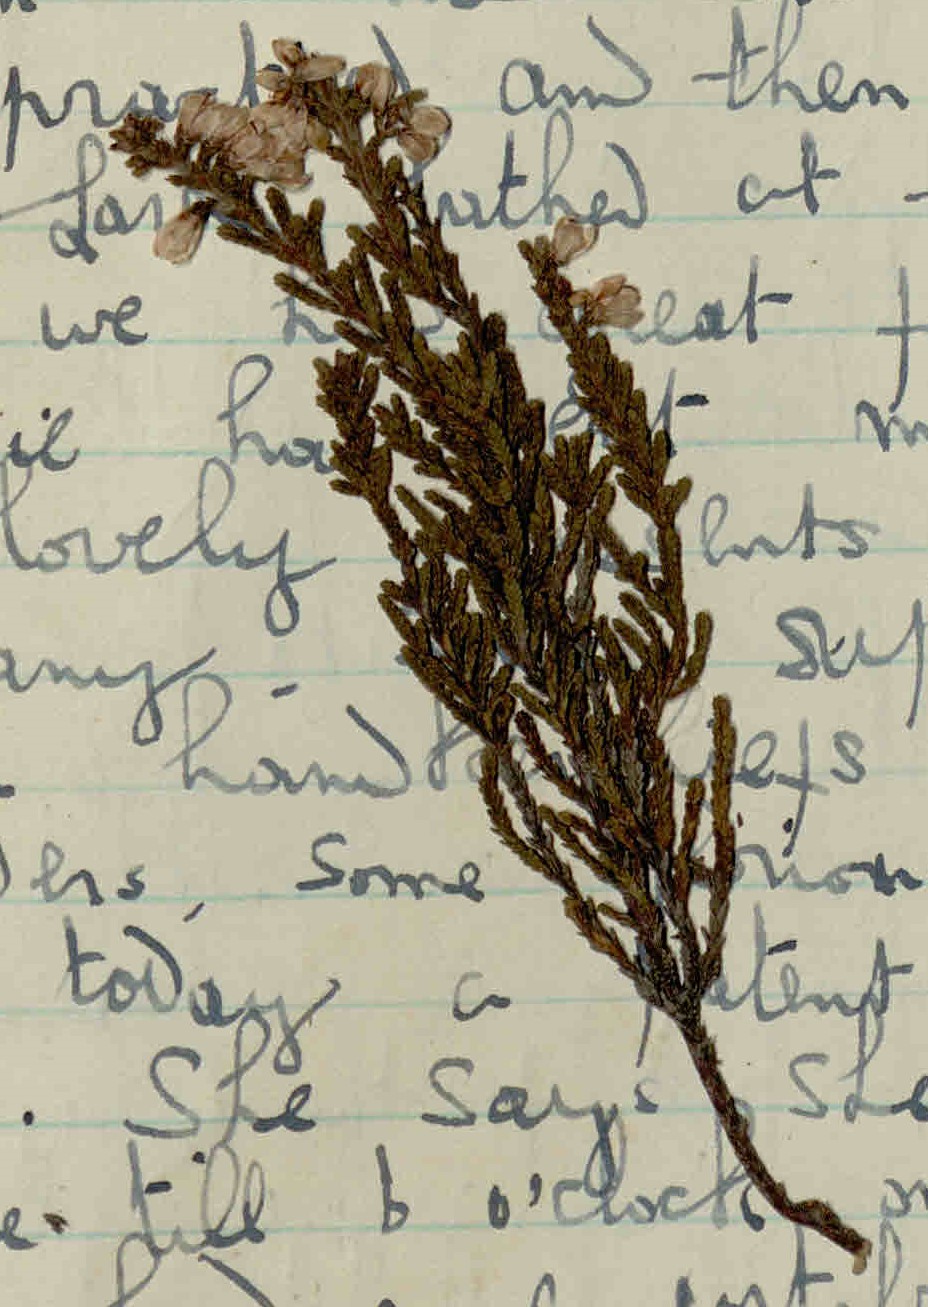 Sprig of white heather enclosed in diary